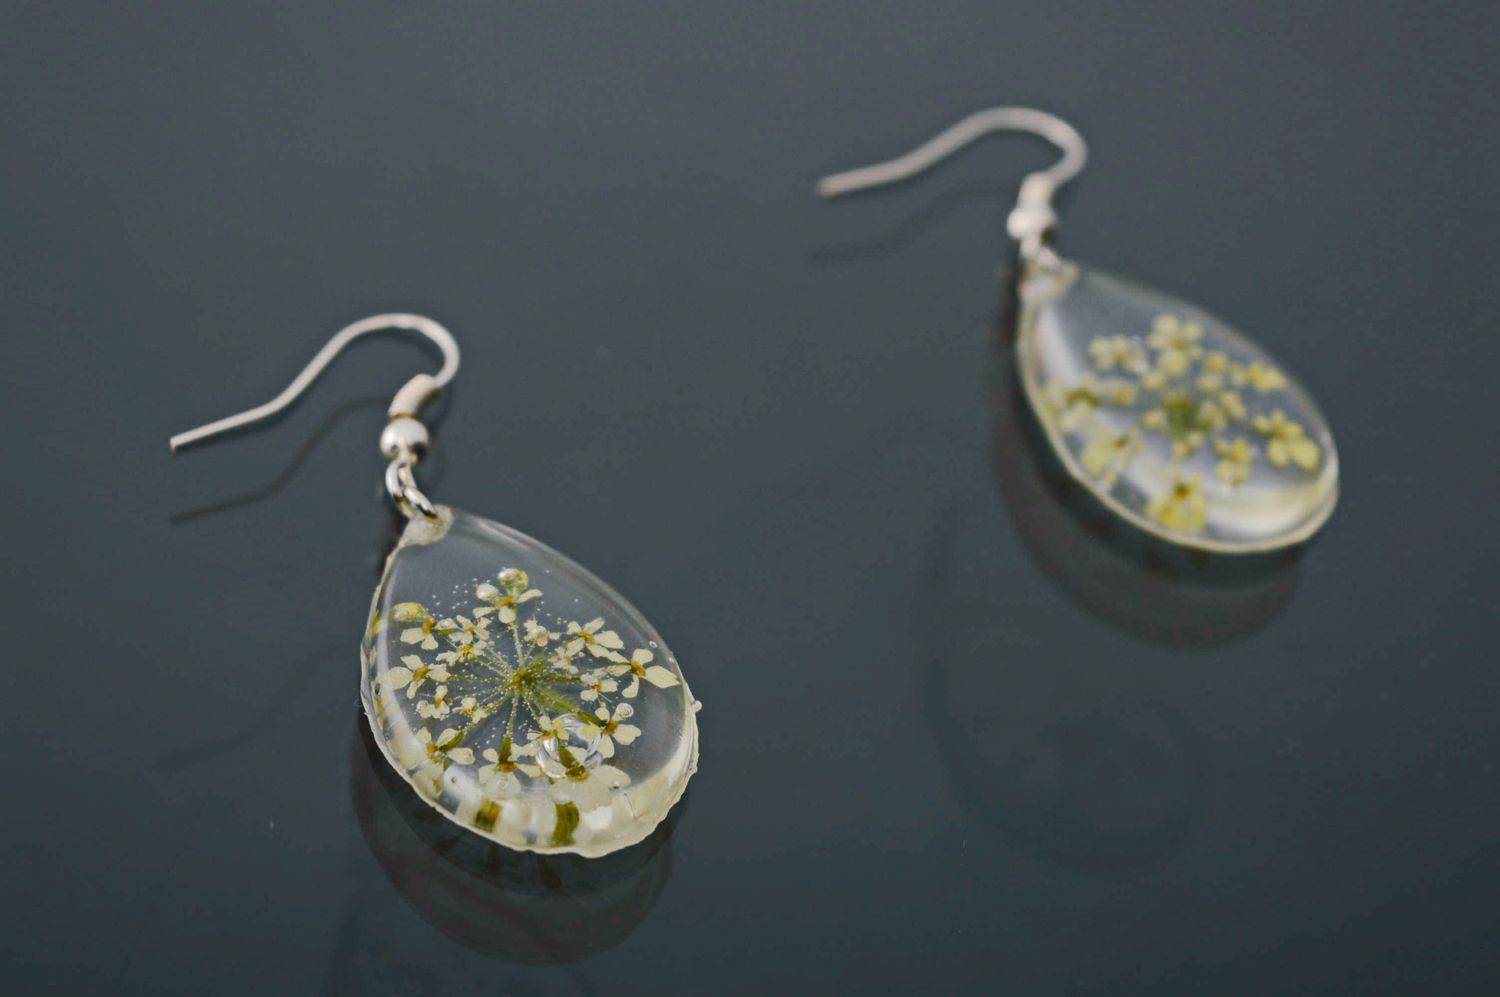 Earrings with real wildflowers coated with epoxy photo 1